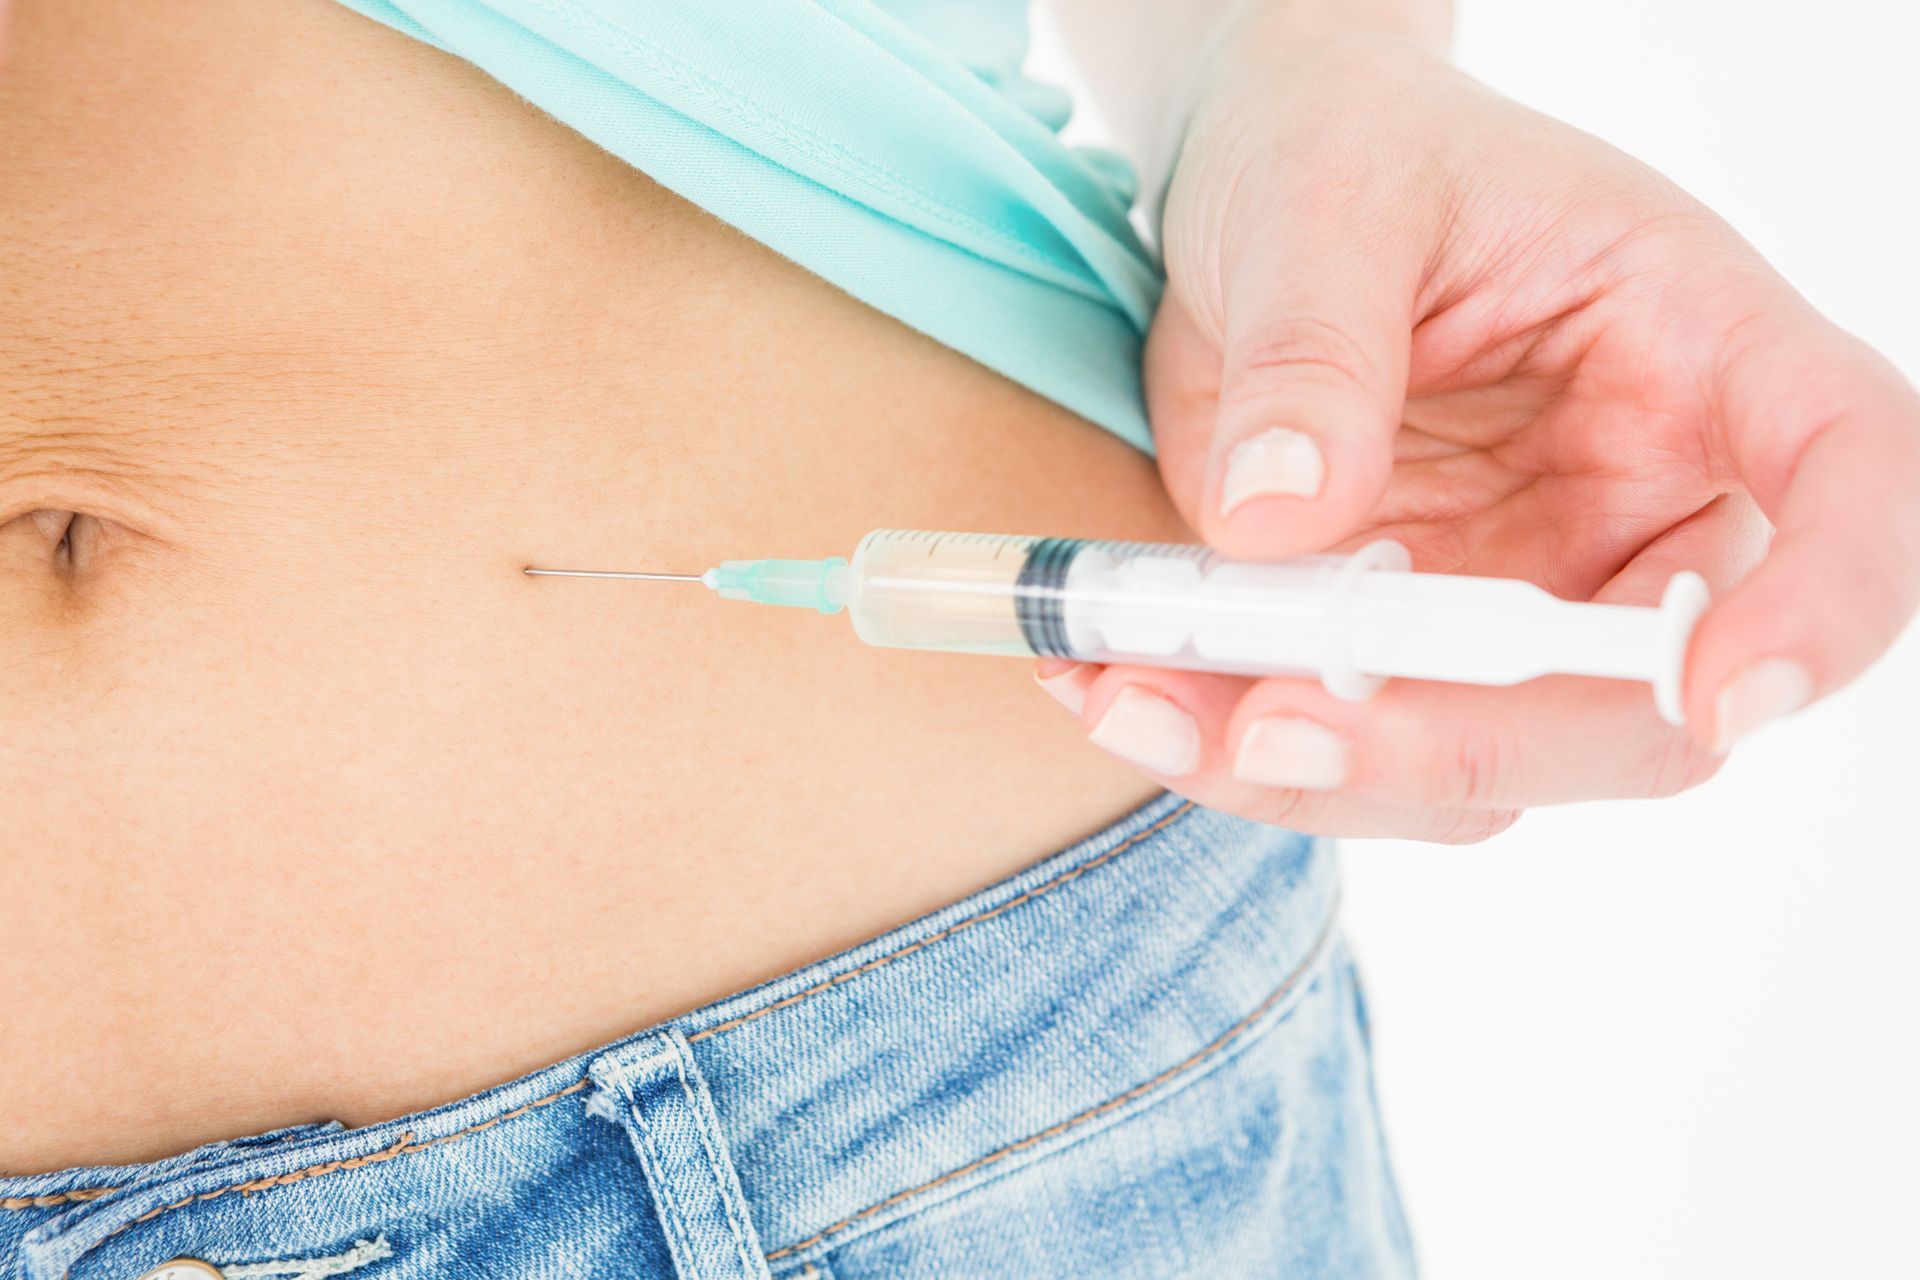 A woman is holding a syringe in her stomach.